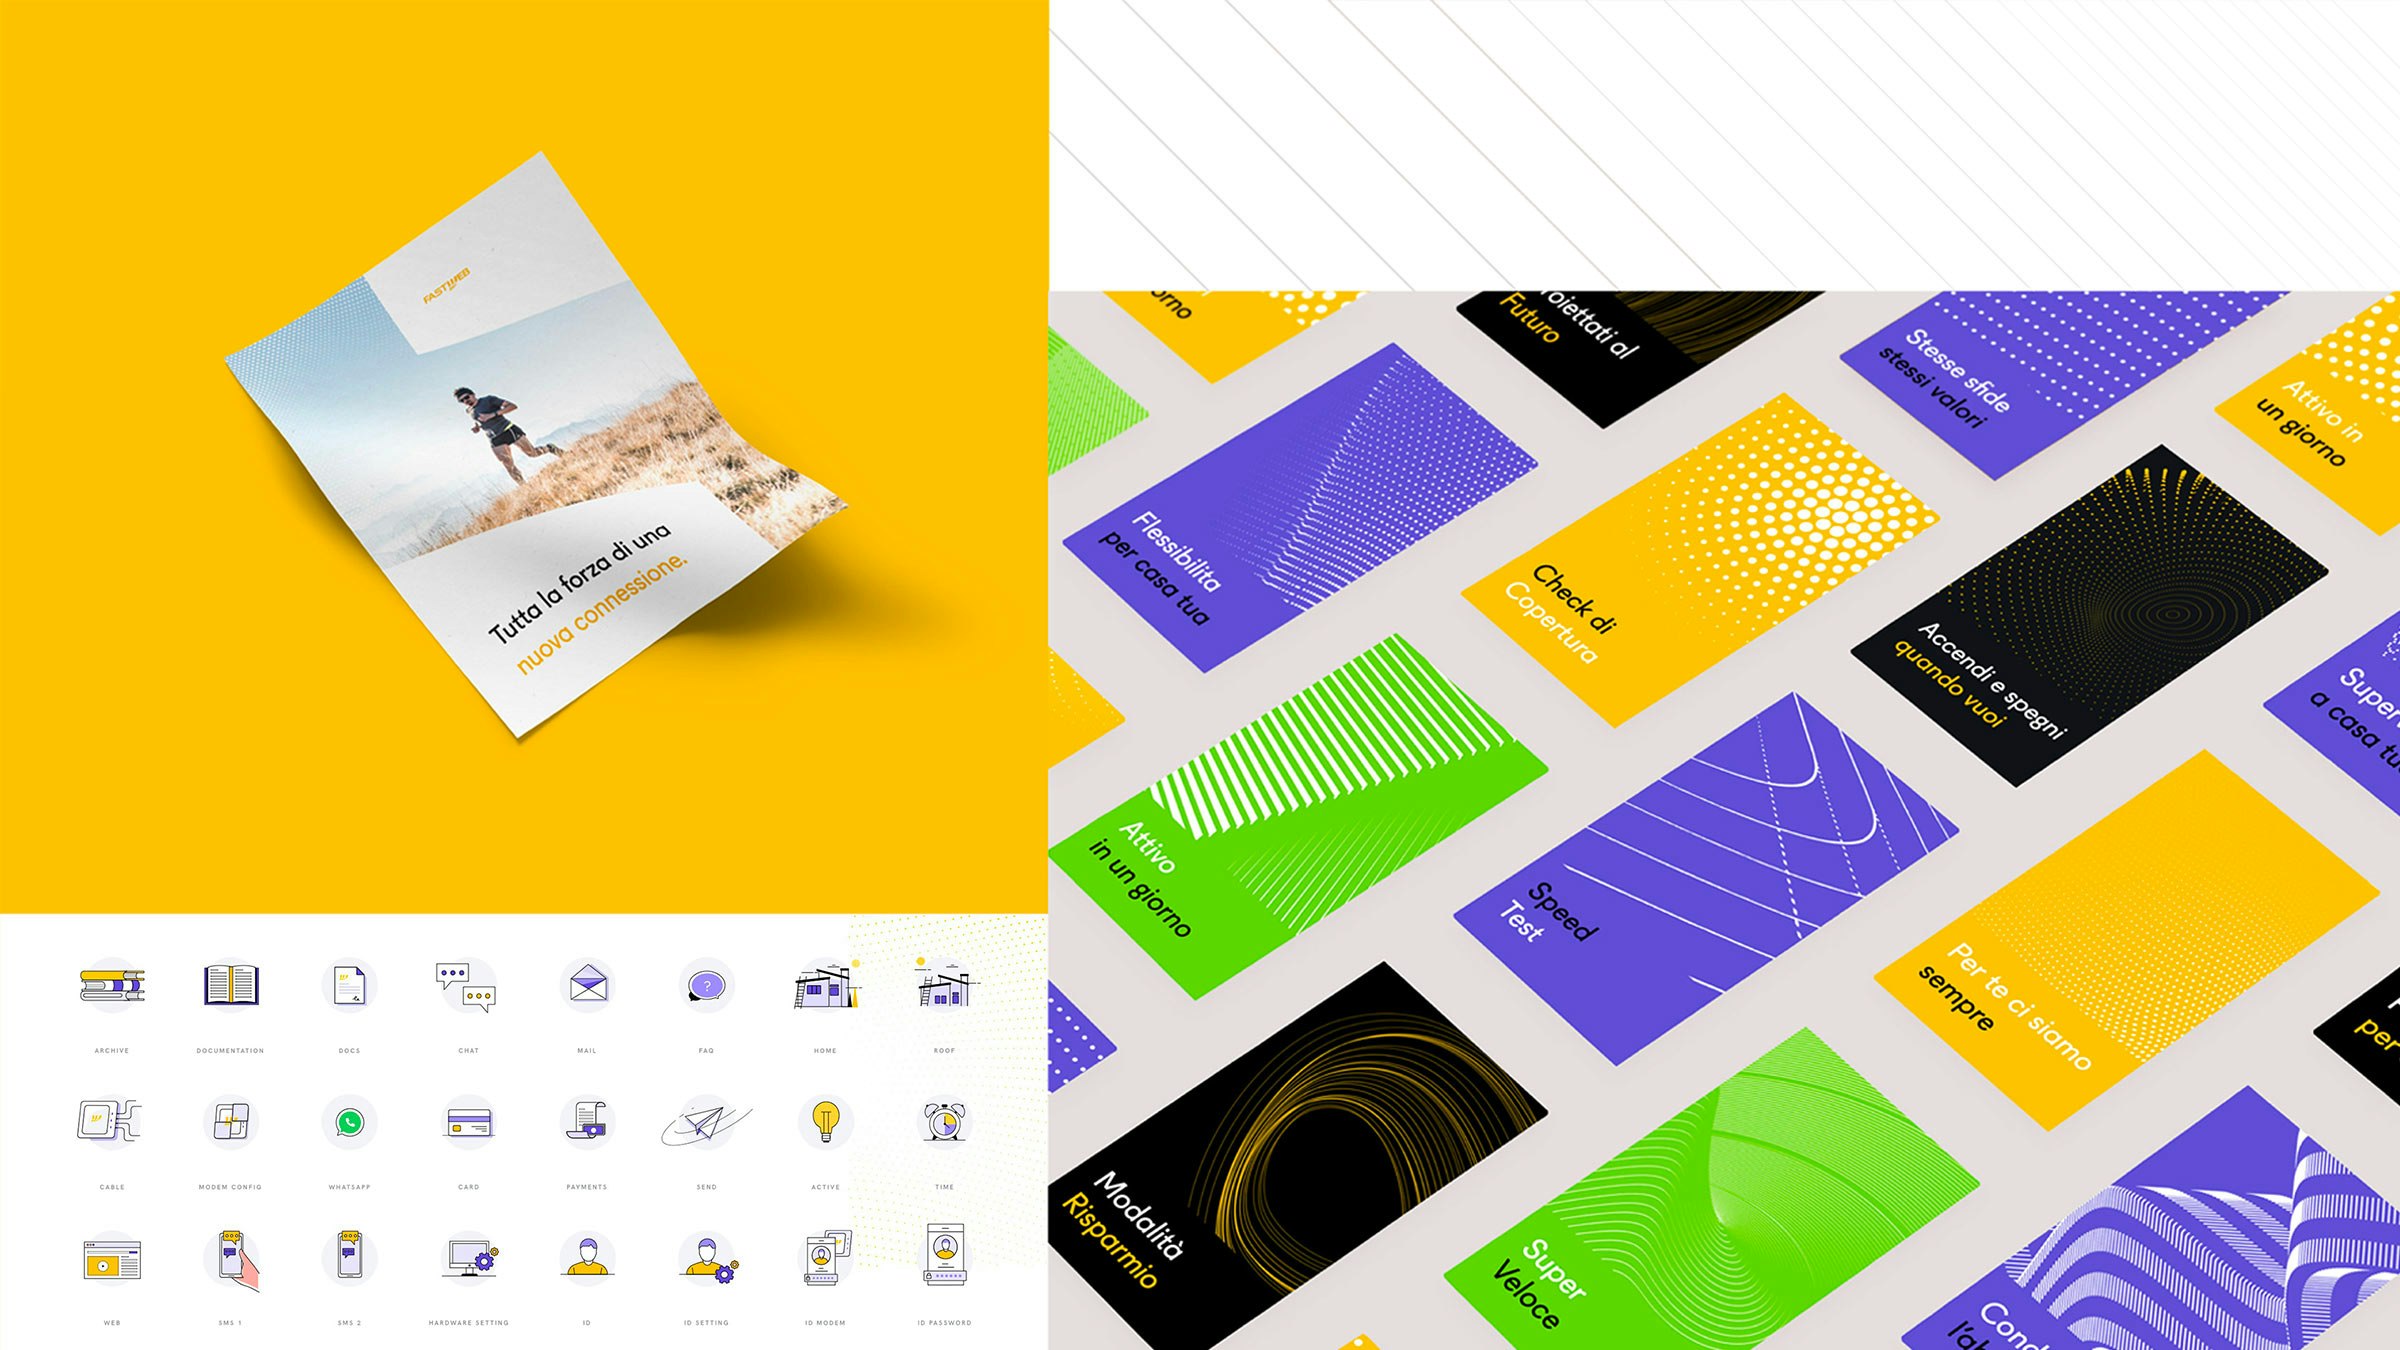 Icons and colour contrasts in NeXXt's Digital Brand Identity